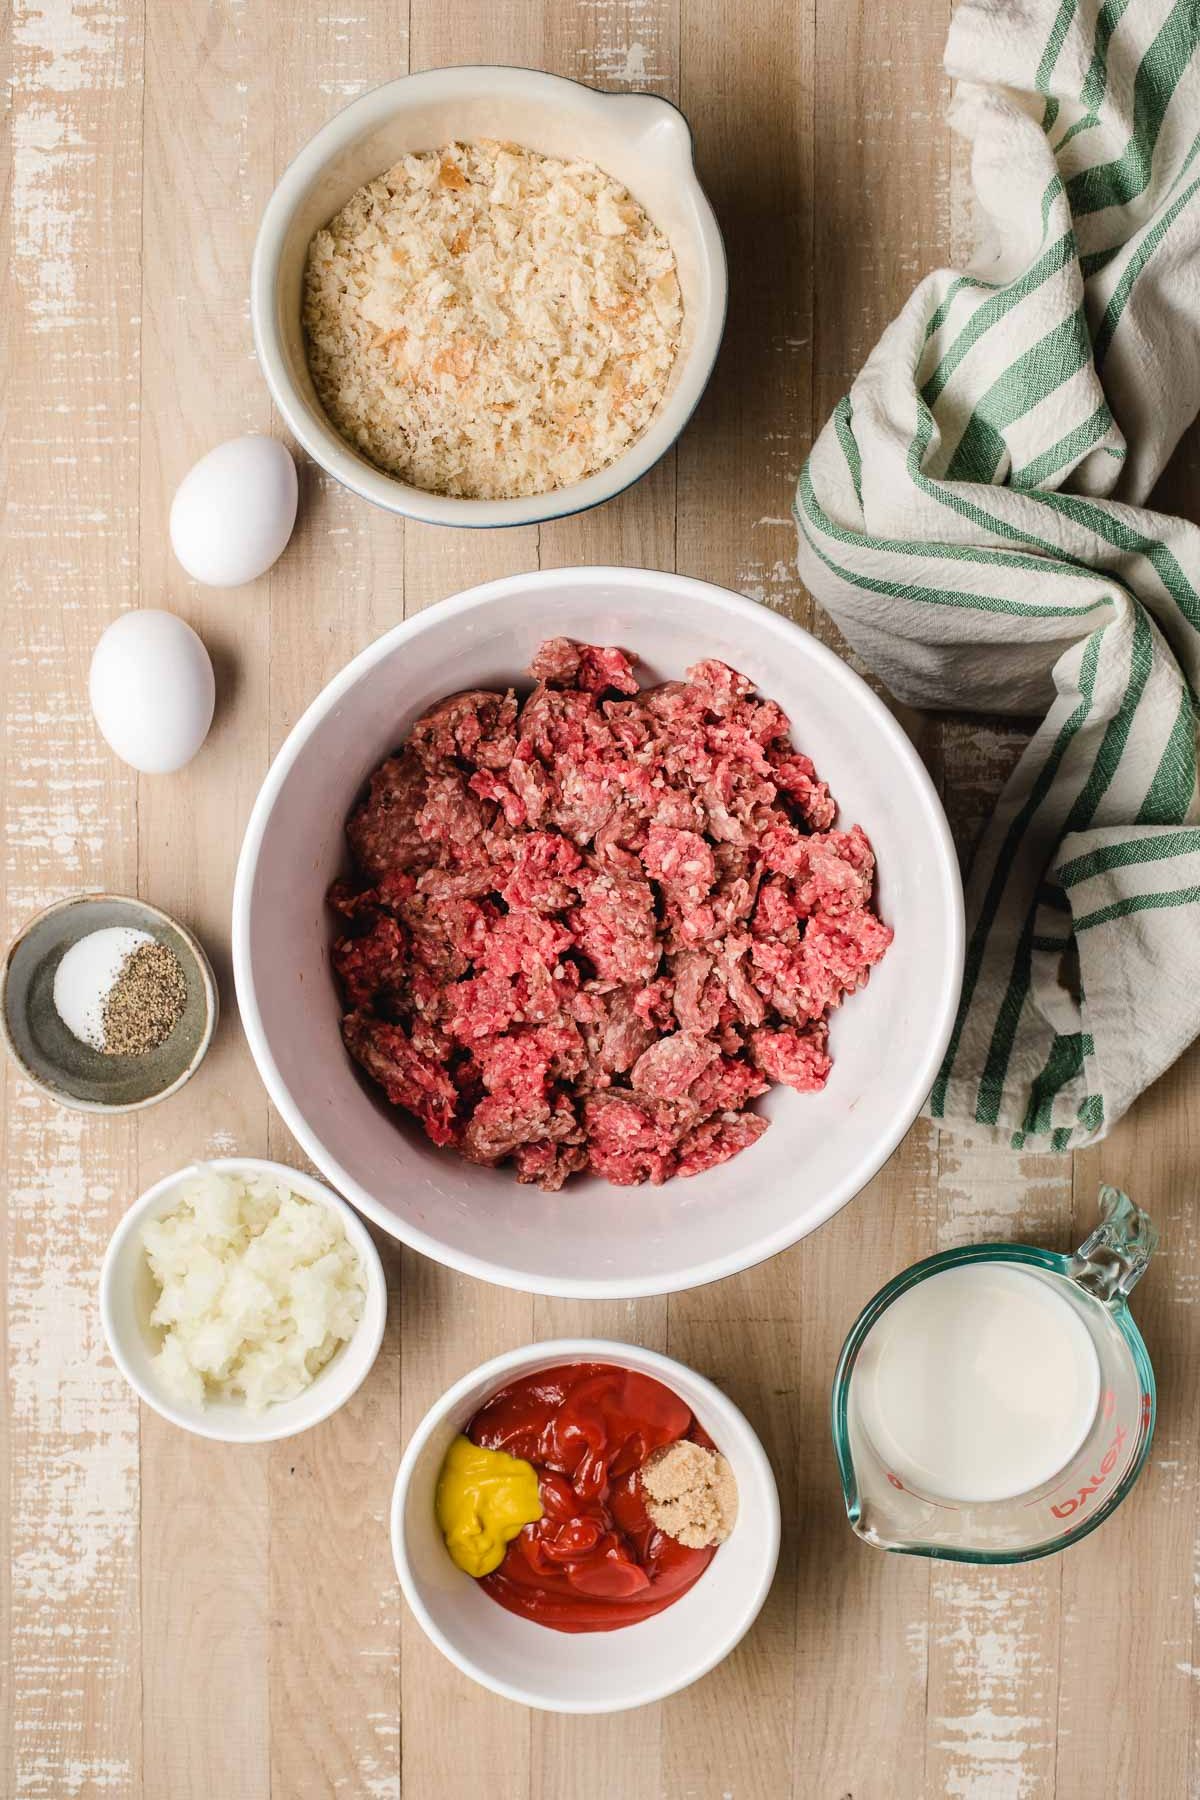 All the ingredients needed to make our air fryer meatloaf recipe.